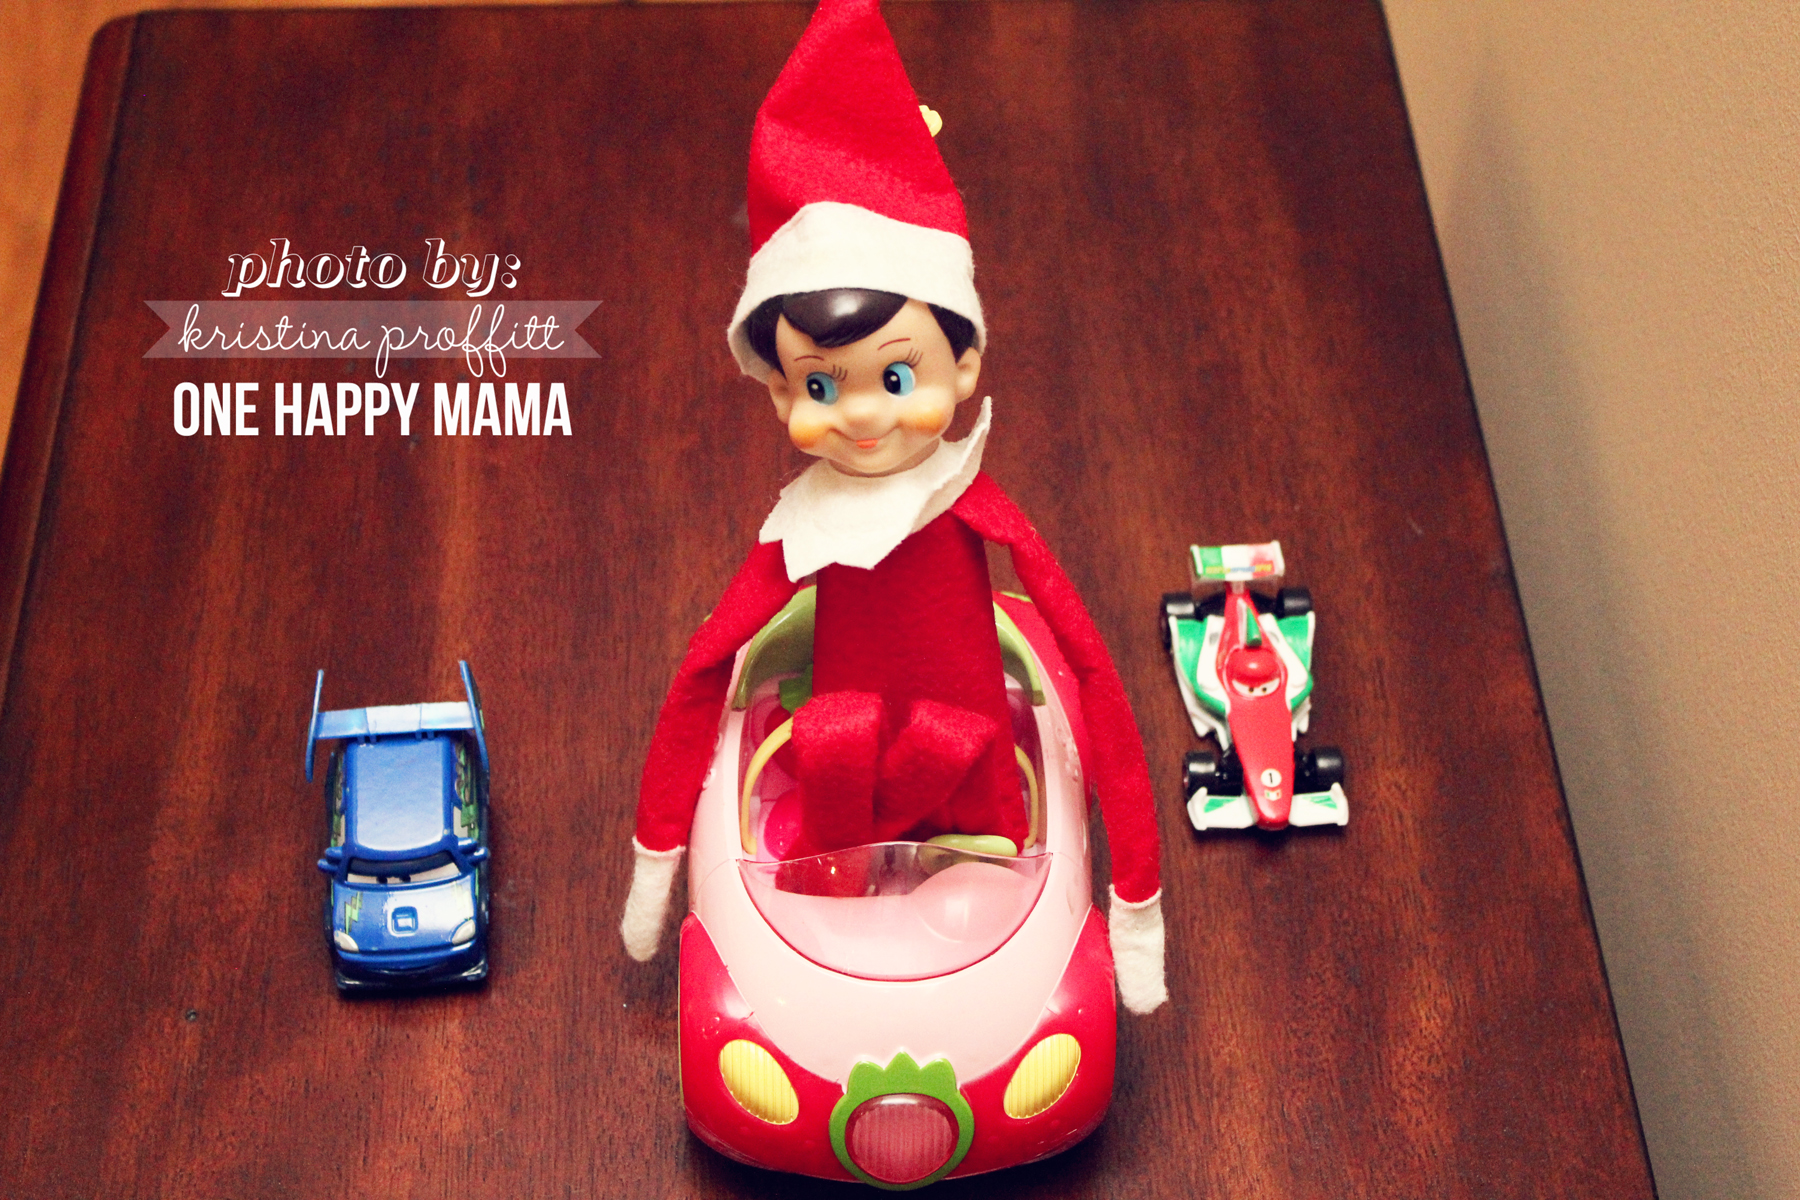 Adventures of Henry the Elf: Part 5 - One Happy Mama